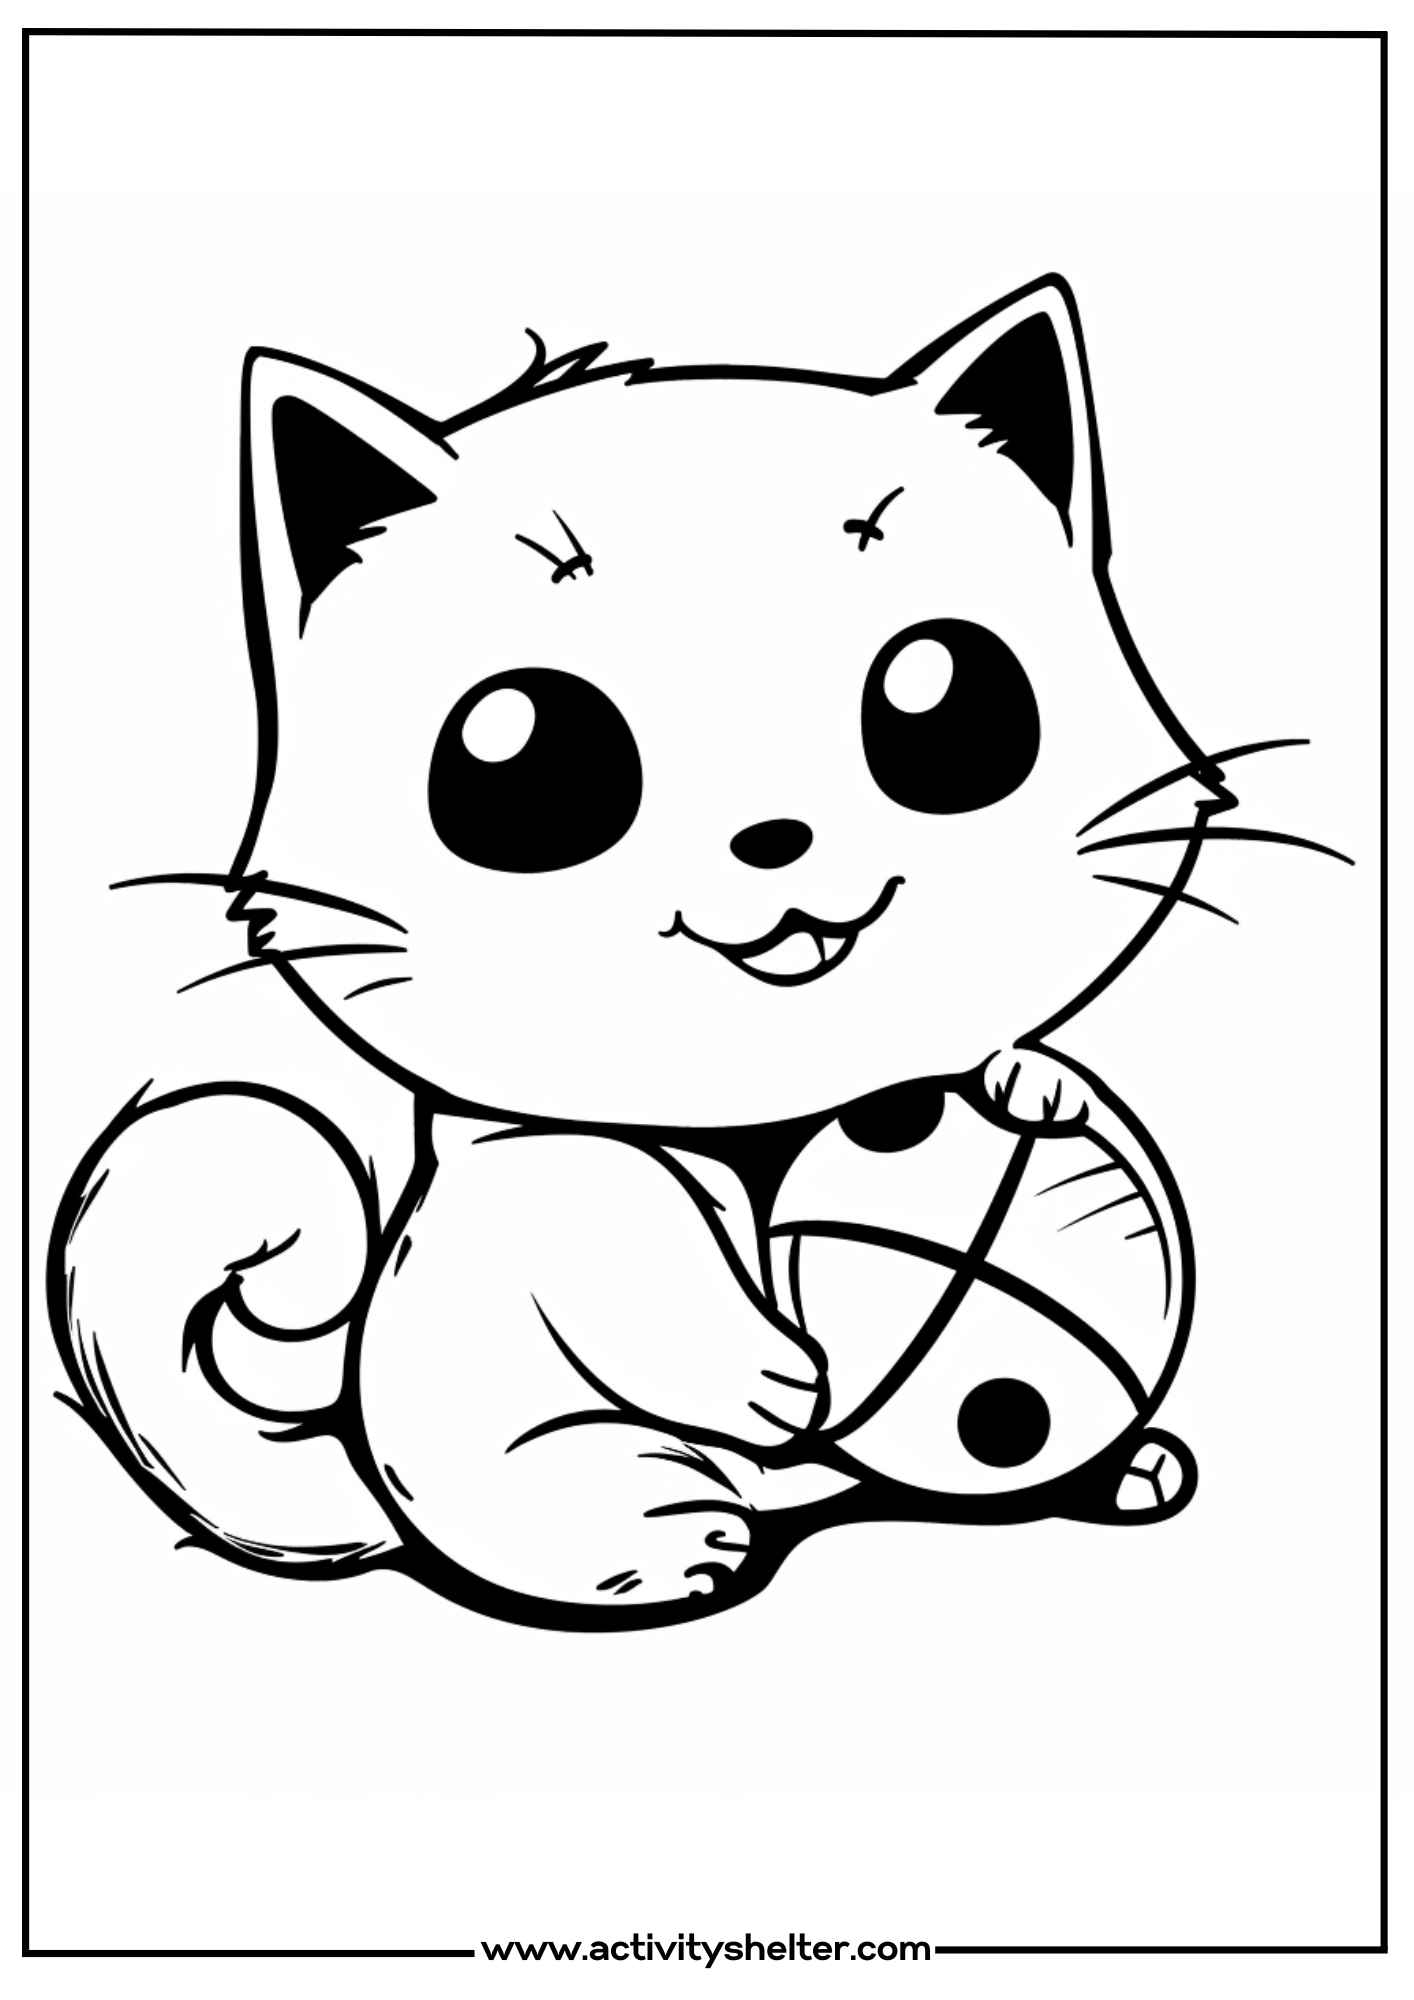 Kitten Holding Ball Coloring Pages Free Printable